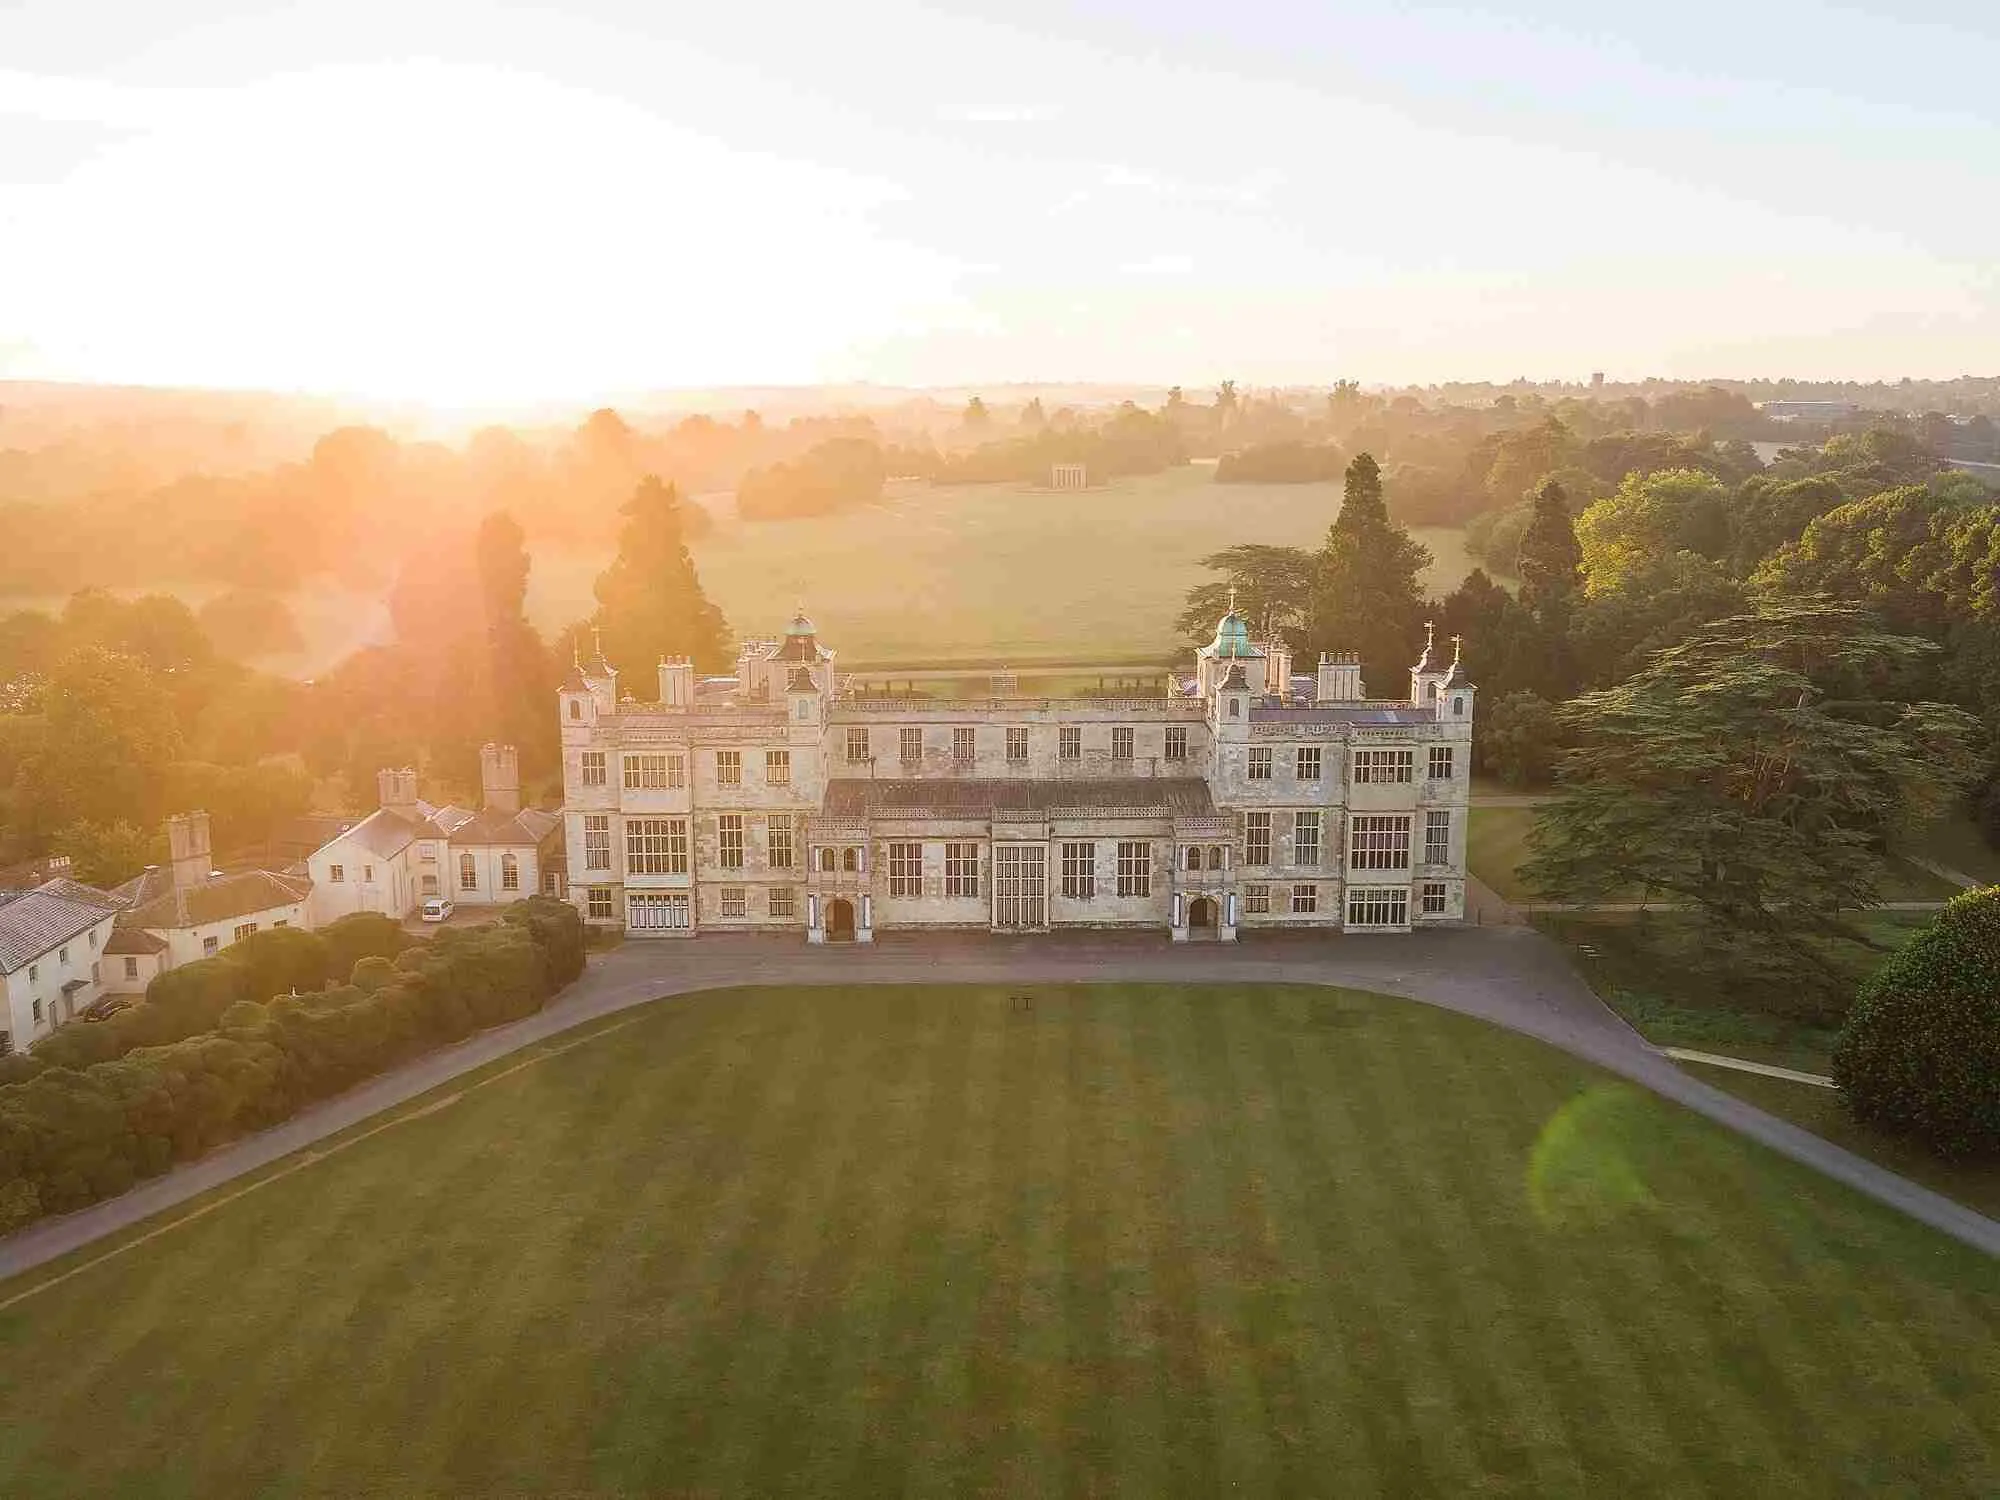 Audley End from the air